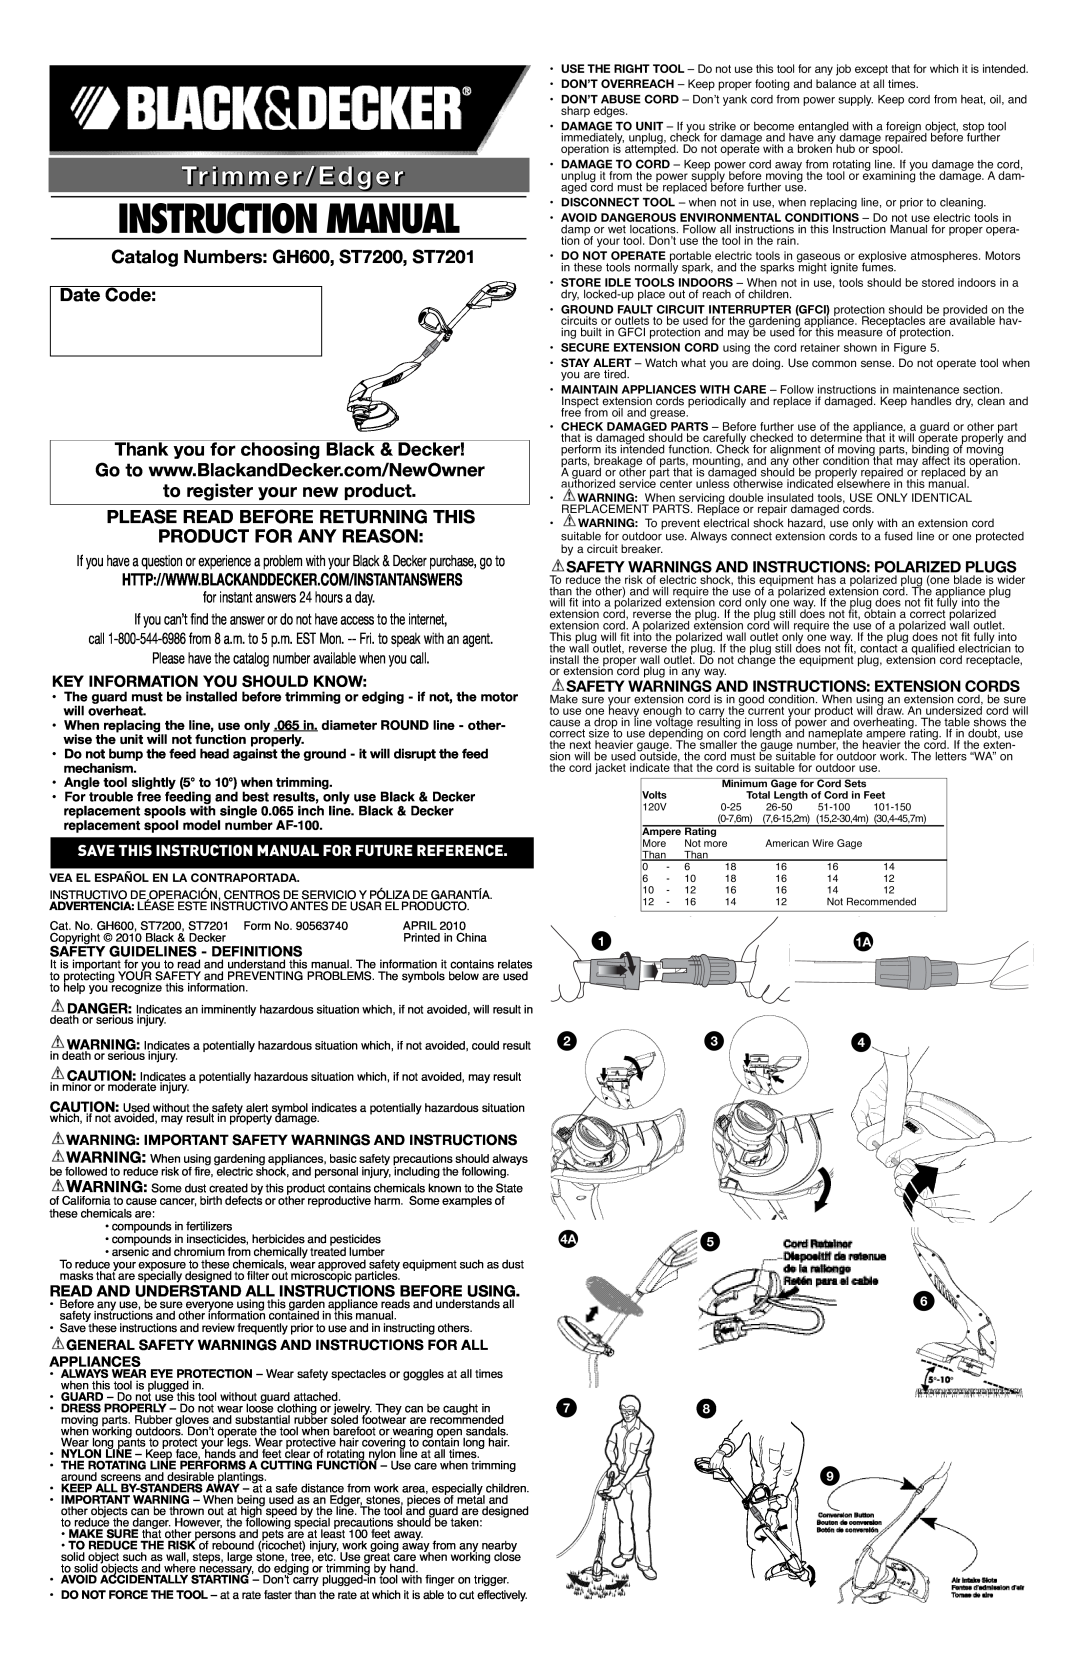 Black & Decker instruction manual Catalog Numbers GH600, ST7200, ST7201 Date Code, to register your new product, 4A5 